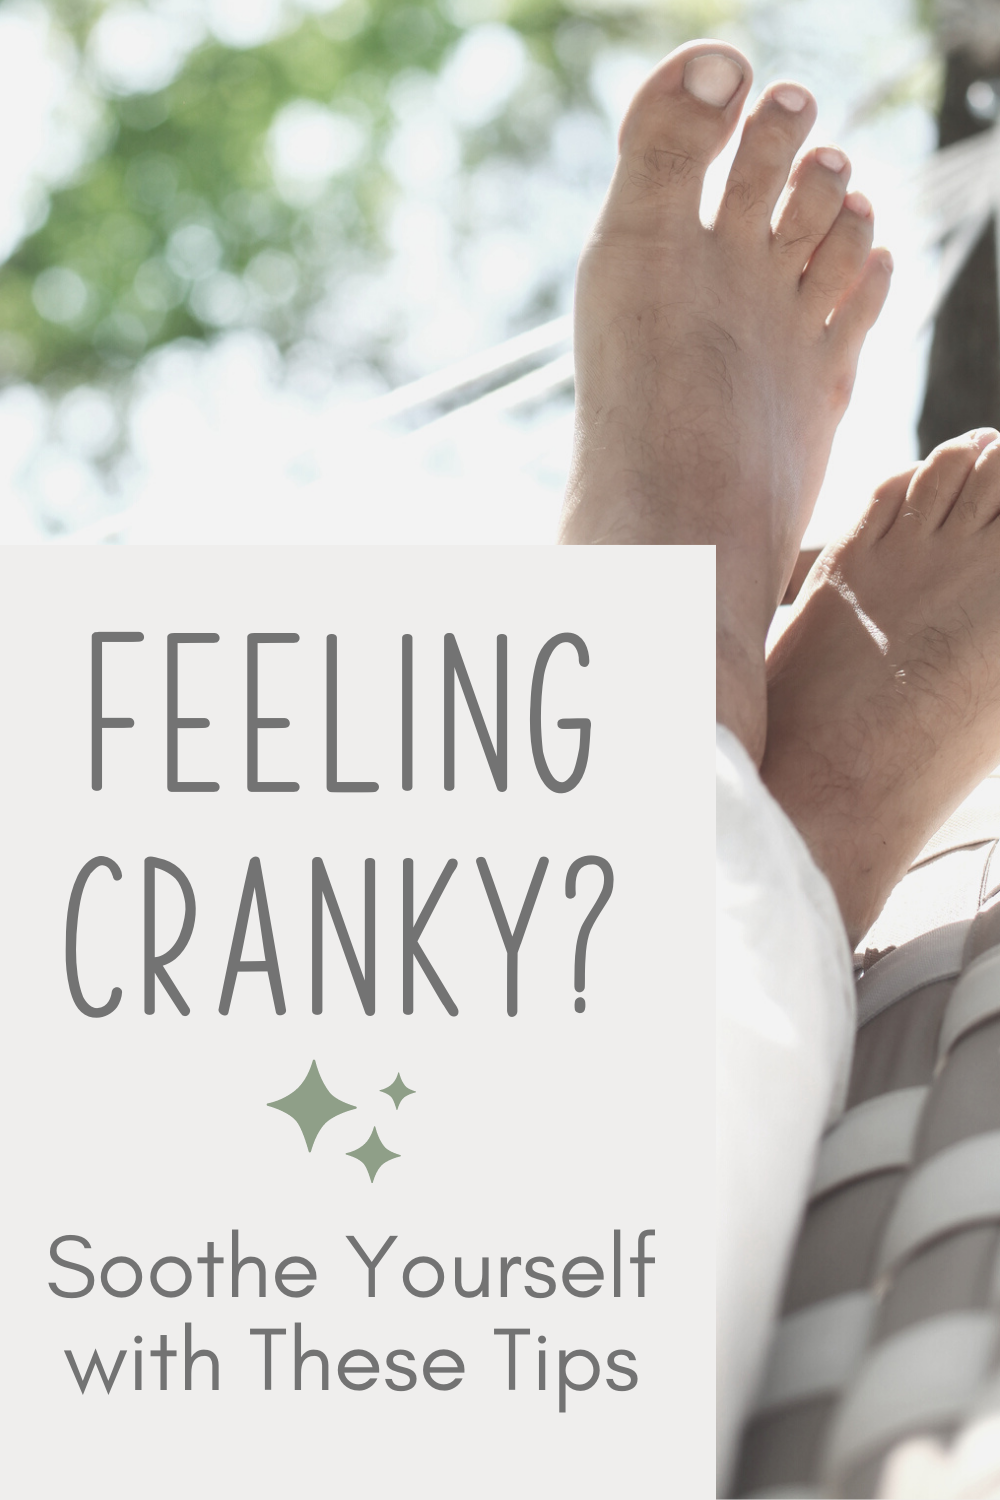 Image of feet propped up on a hammock outside - Text overlay: Feeling Cranky? Sooth yourself with these tips